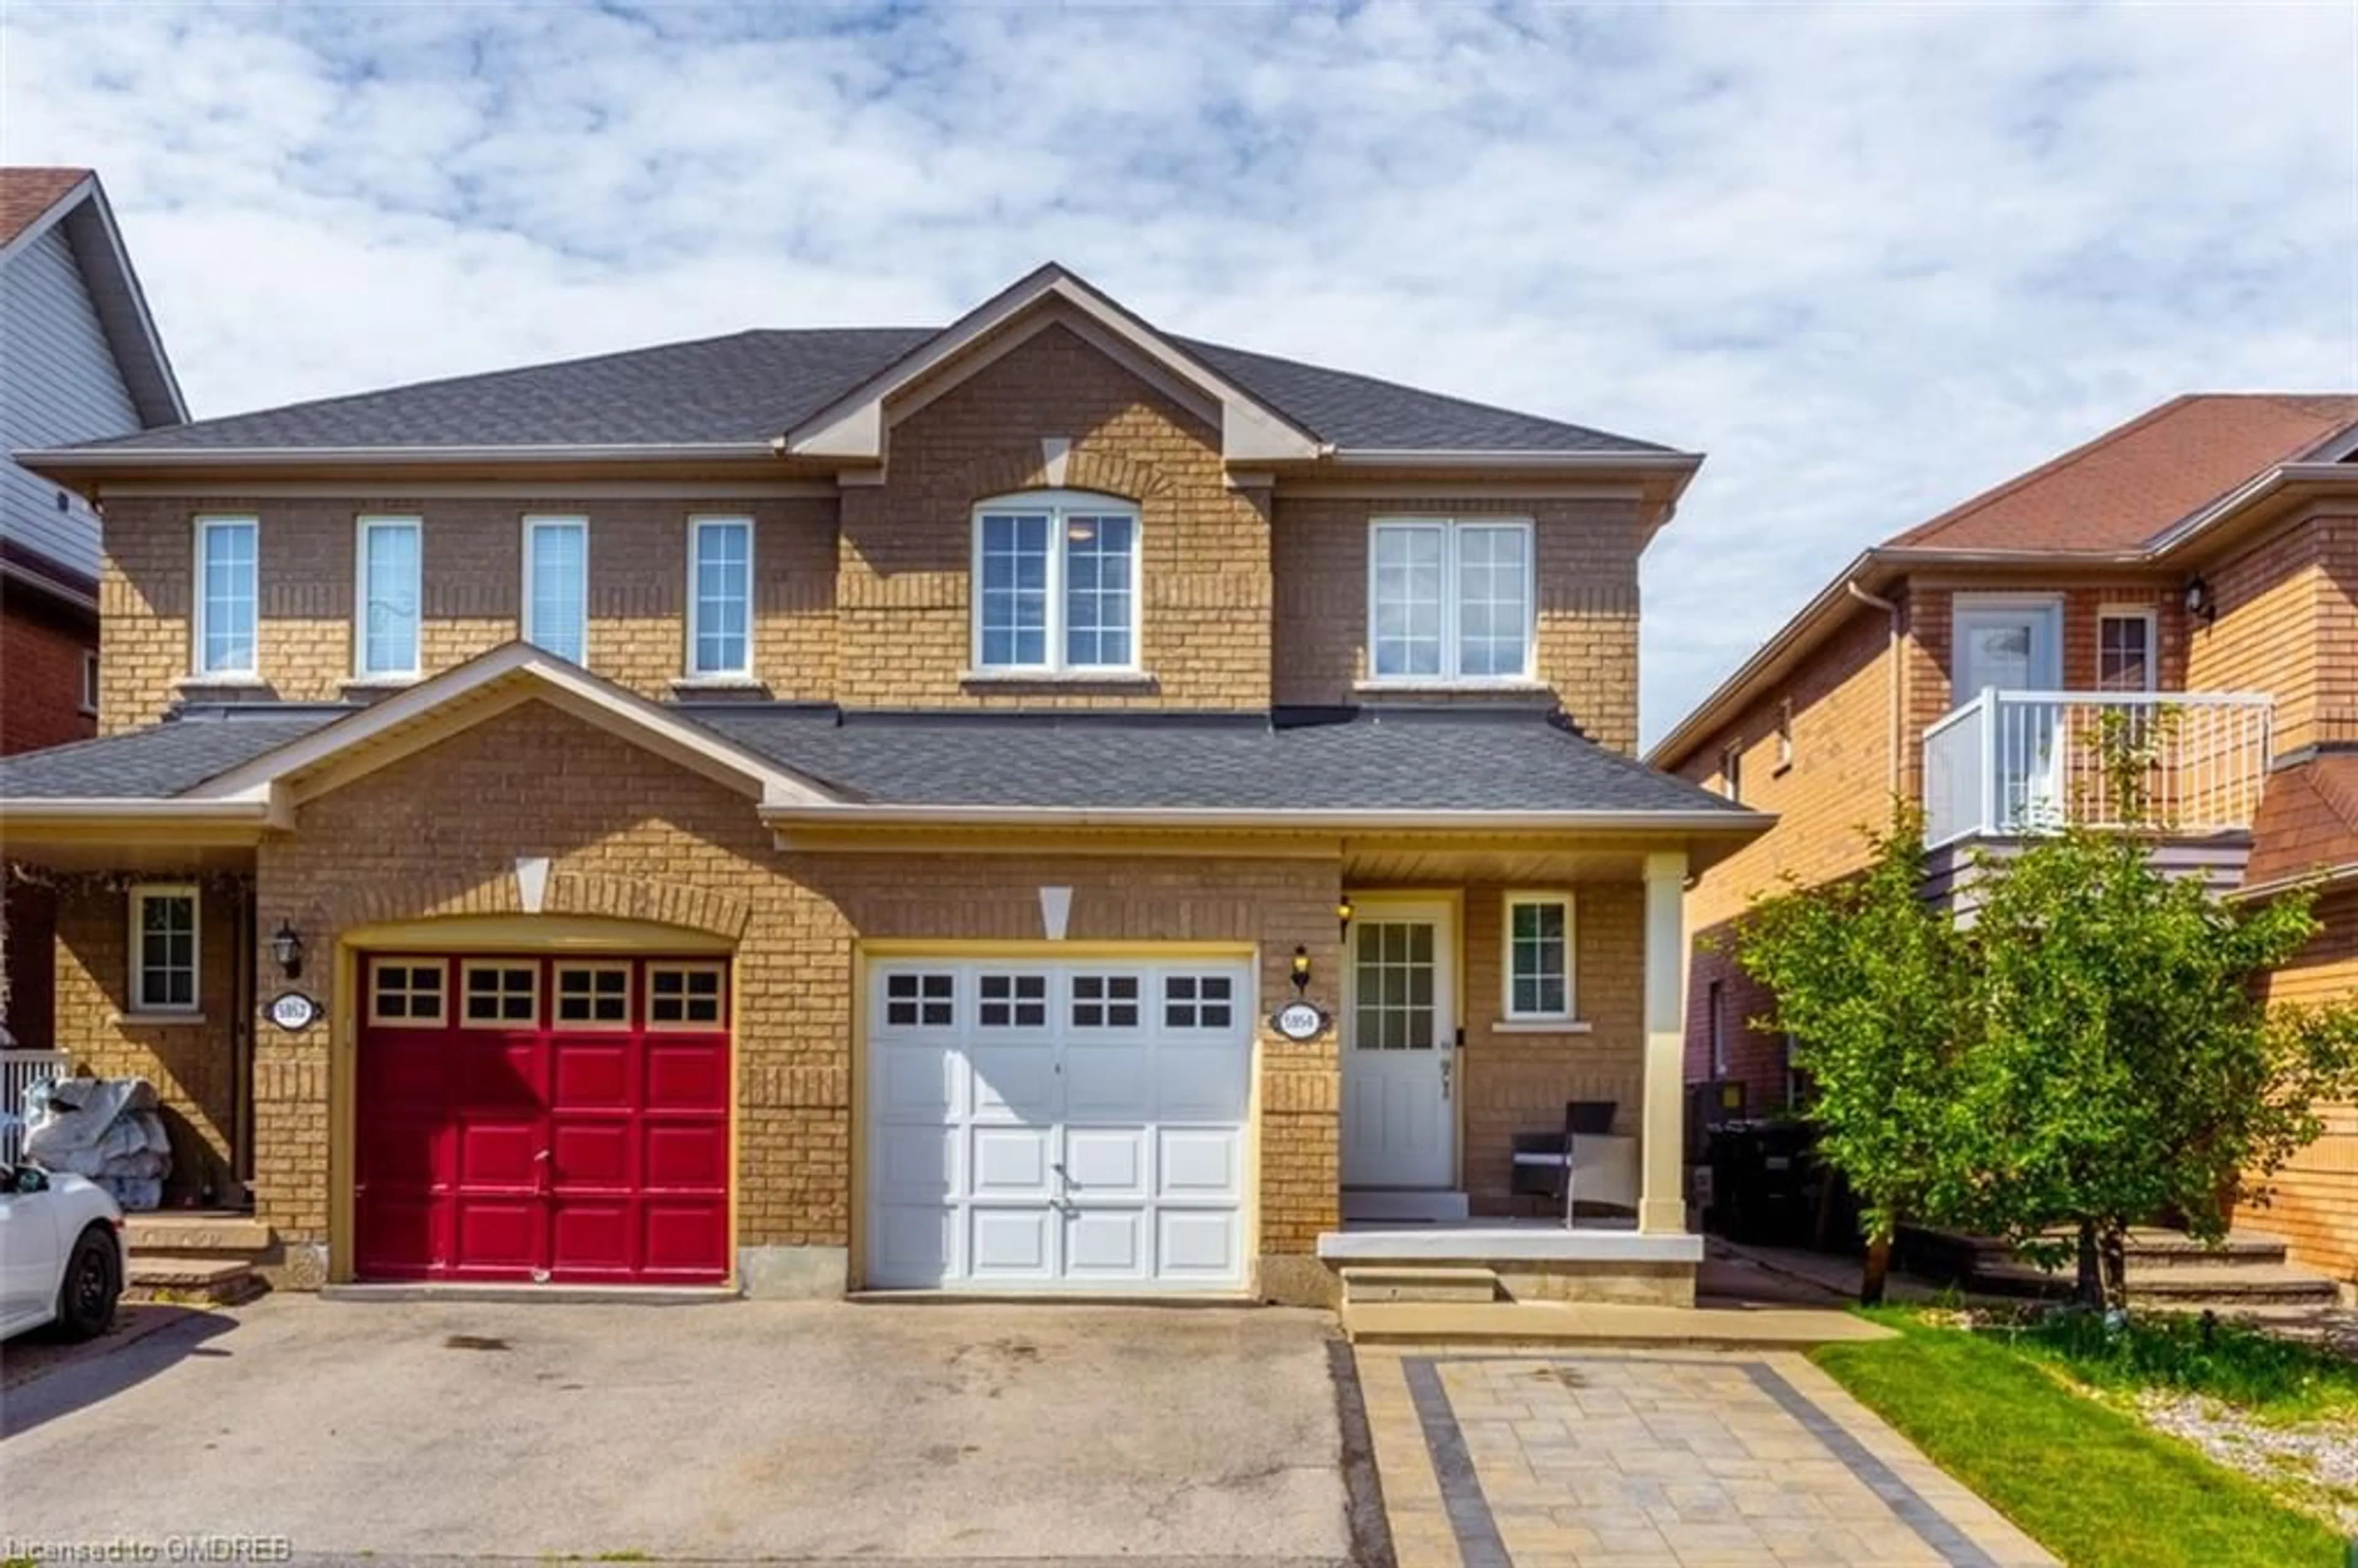 Home with brick exterior material for 5954 Algarve Dr, Mississauga Ontario L5M 6Y7